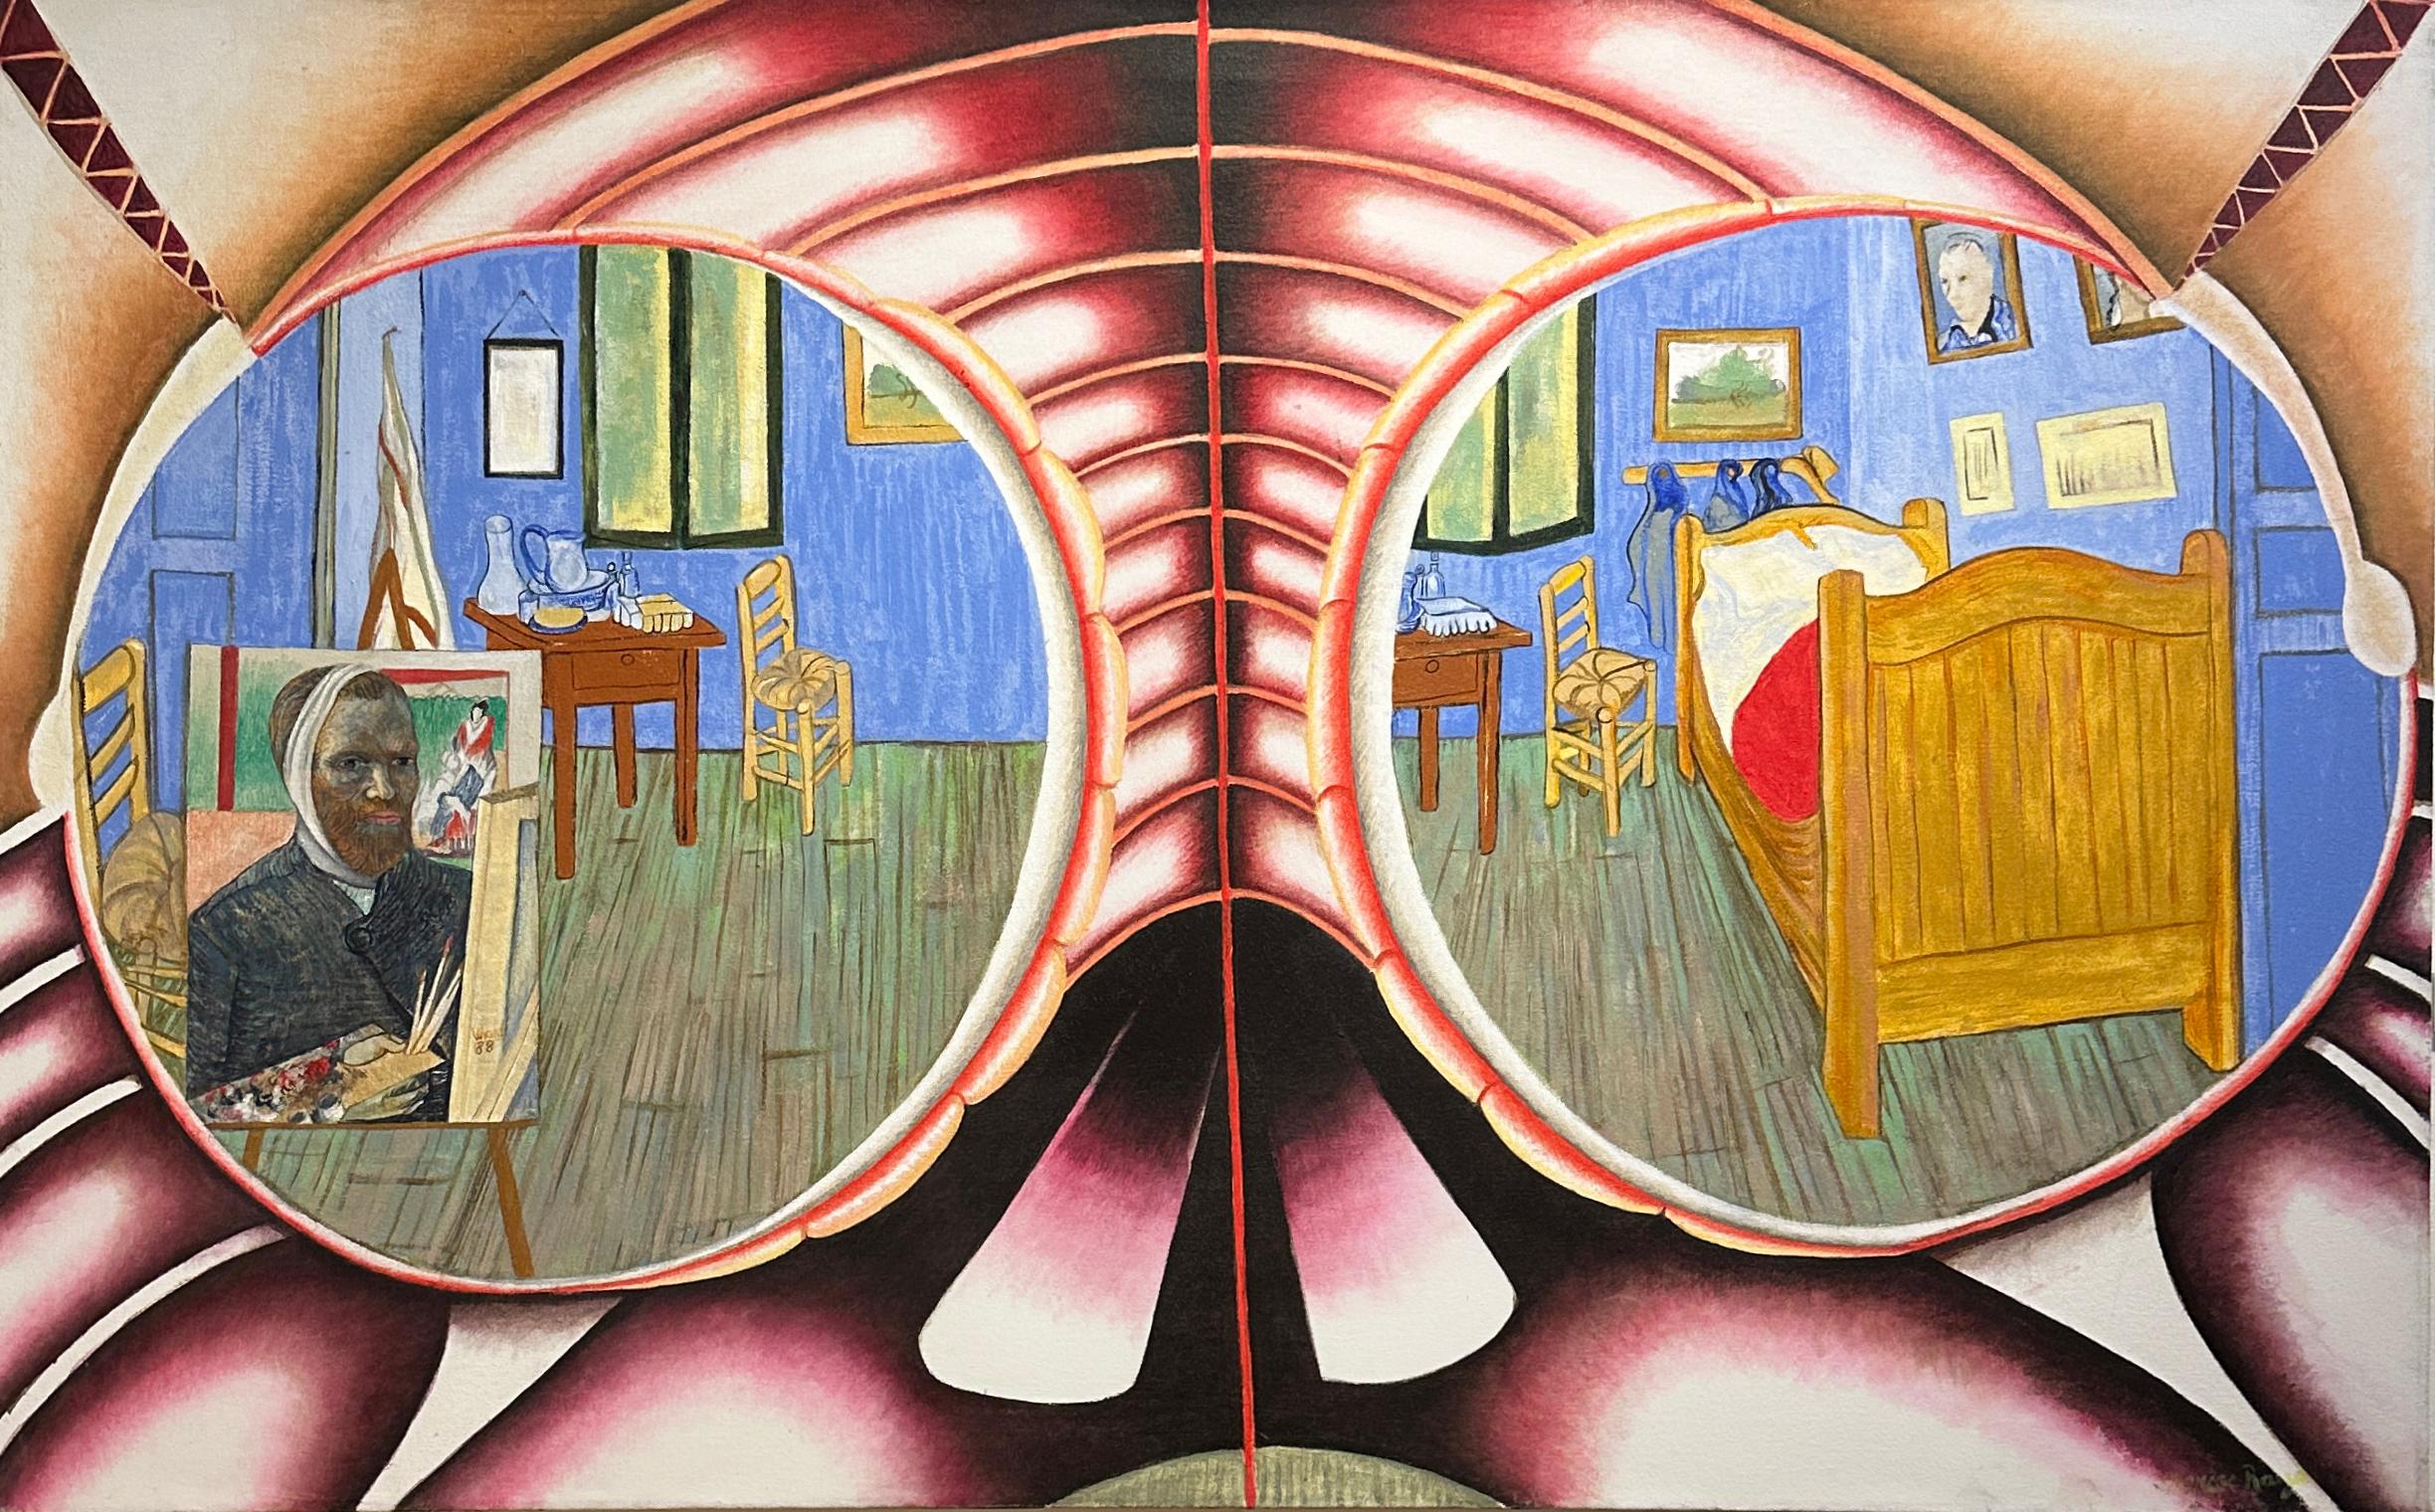 Marcos Raya Abstract Painting - Through the Eyes of Van Gogh -Oil Painting Looking Into Van Gogh's "The Bedroom"